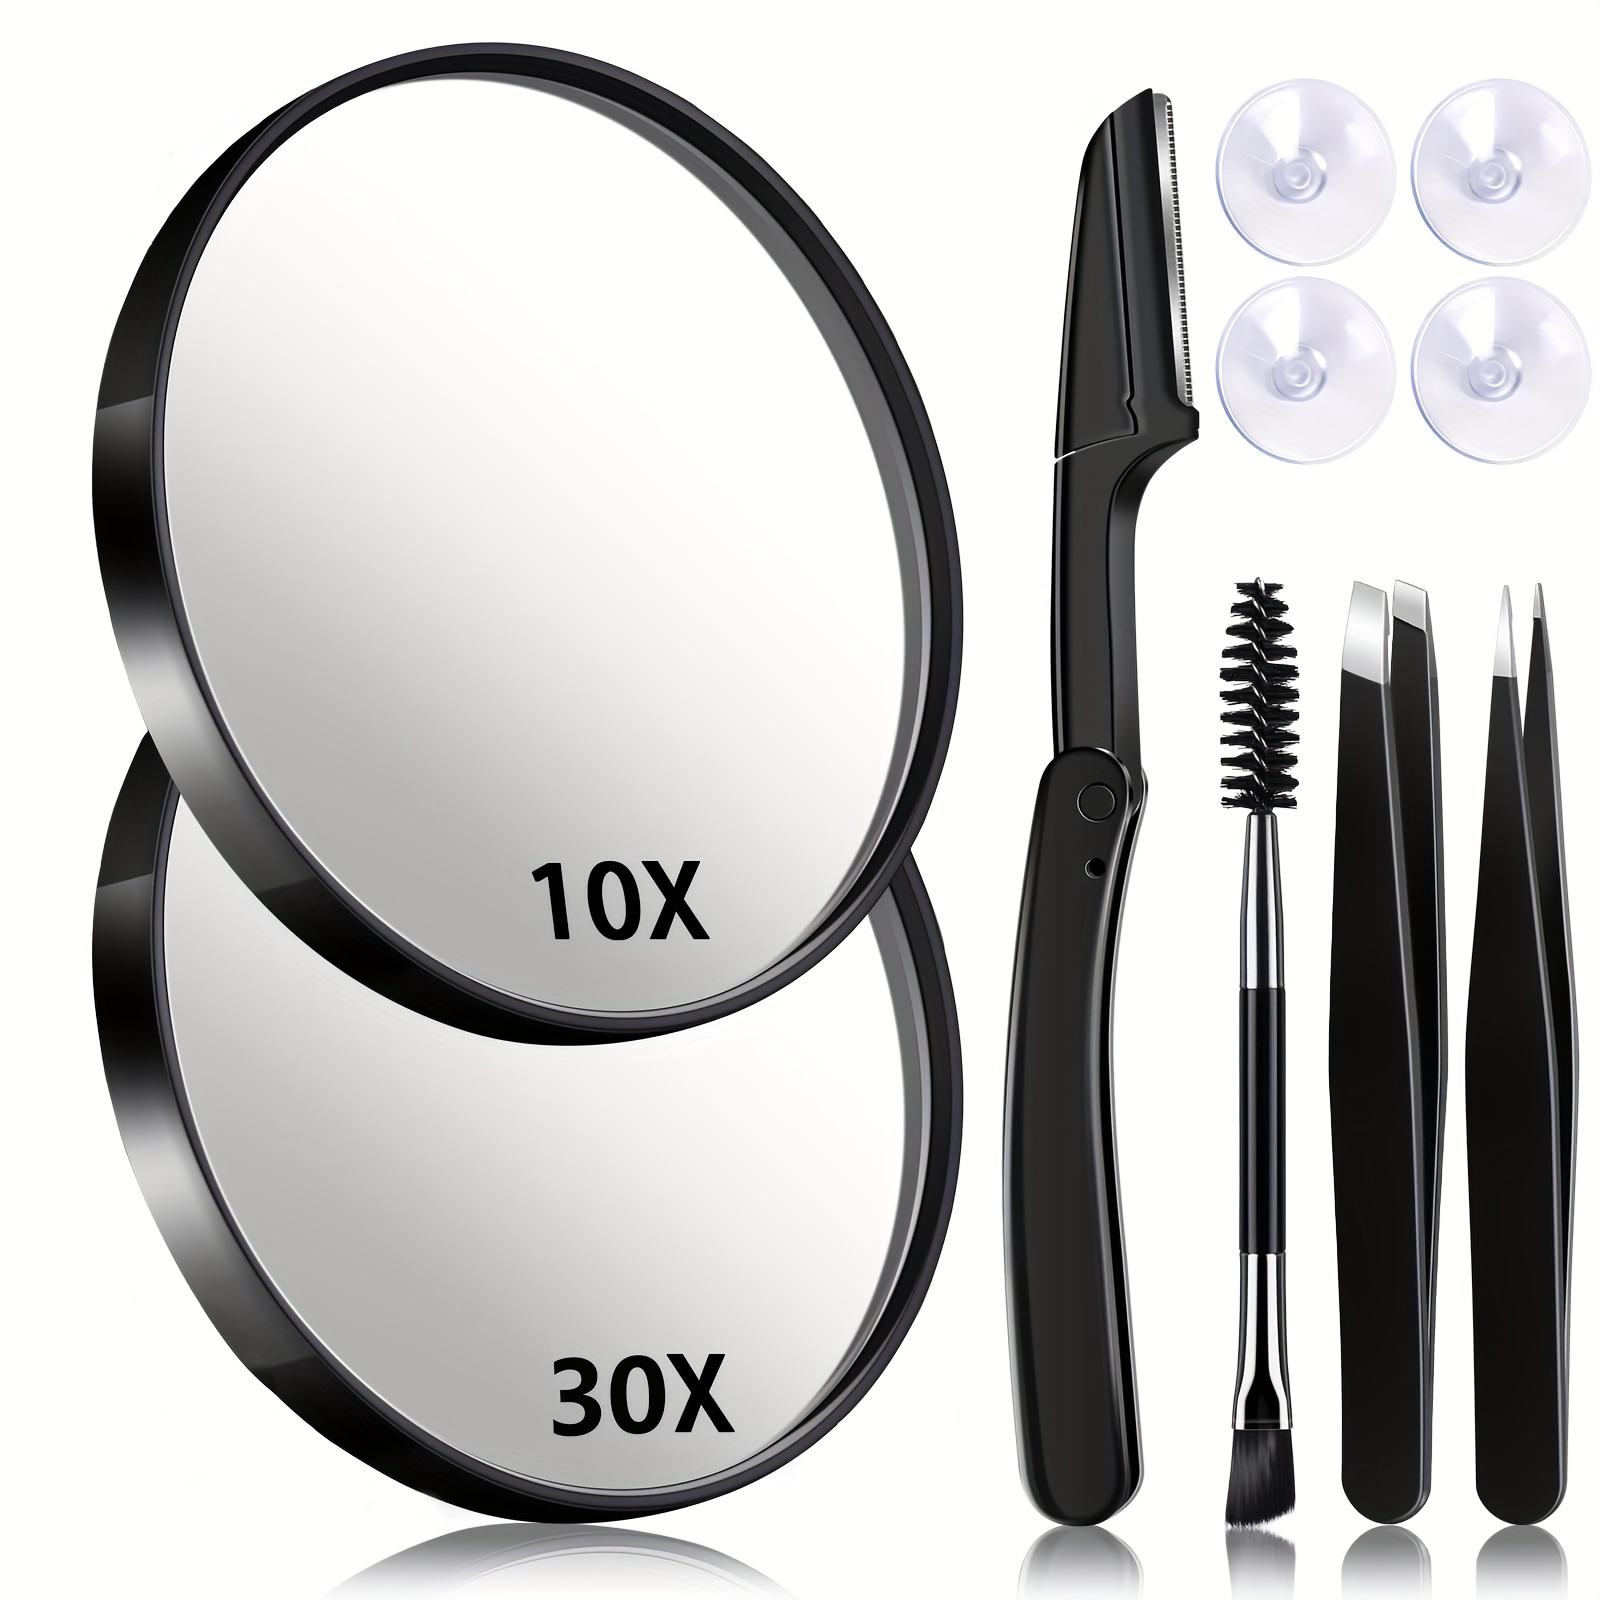 

Eyebrow Clip Makeup Mirror 1/3/6pcs Magnifying Mirror And Eyebrow Tweezer Set, 10x & 25x Magnified Makeup Mirrors With 2 Suction Cups, Tweezers And Eyebrow Razor, Daily Beauty Tools Compact Travel Set